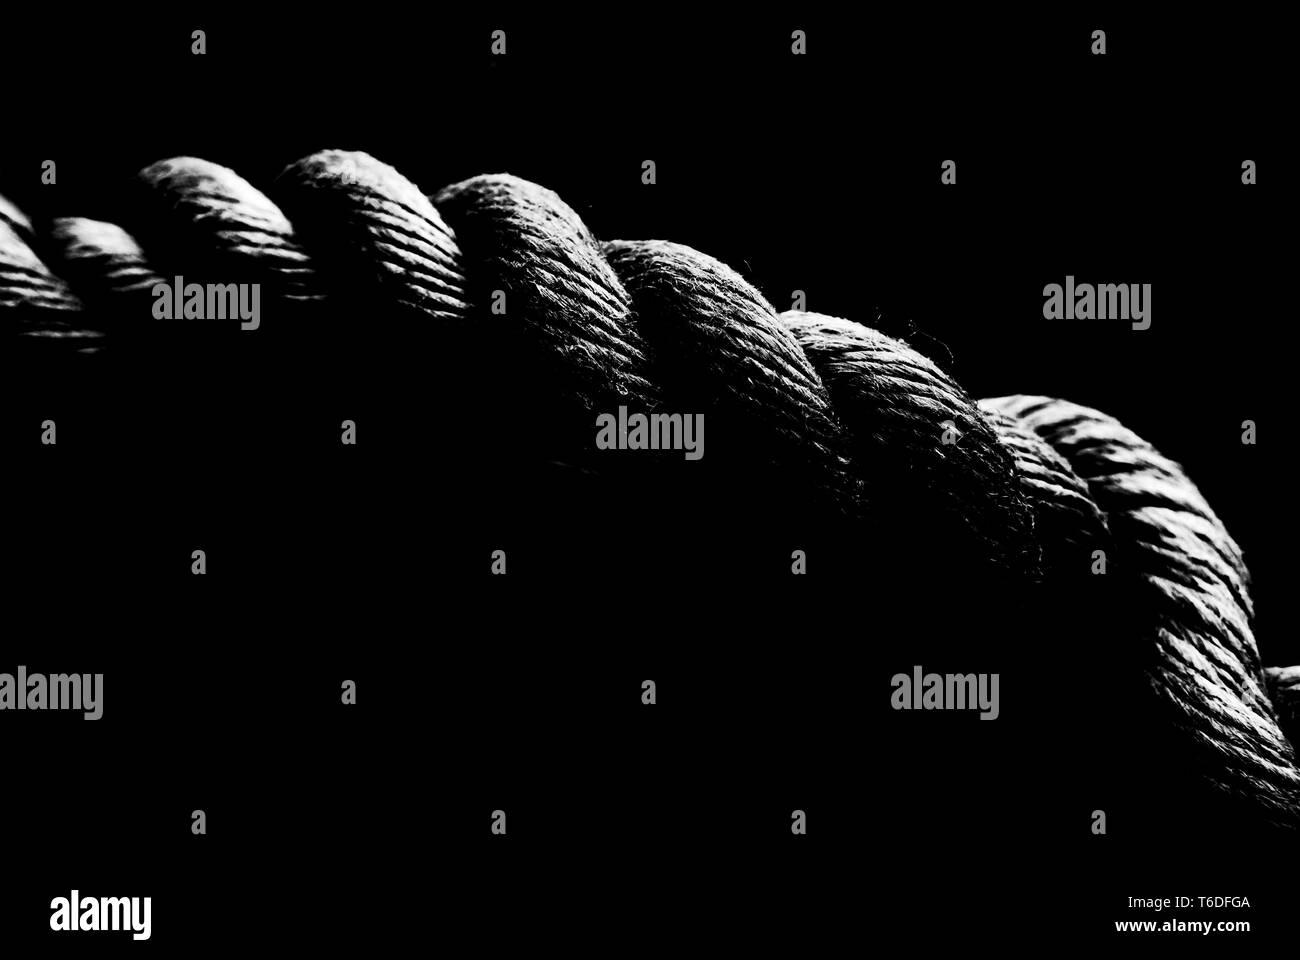 Rope from a sailing boat, black and white at high contrast, low key style, close-up. Shallow depth of field. SDF Stock Photo